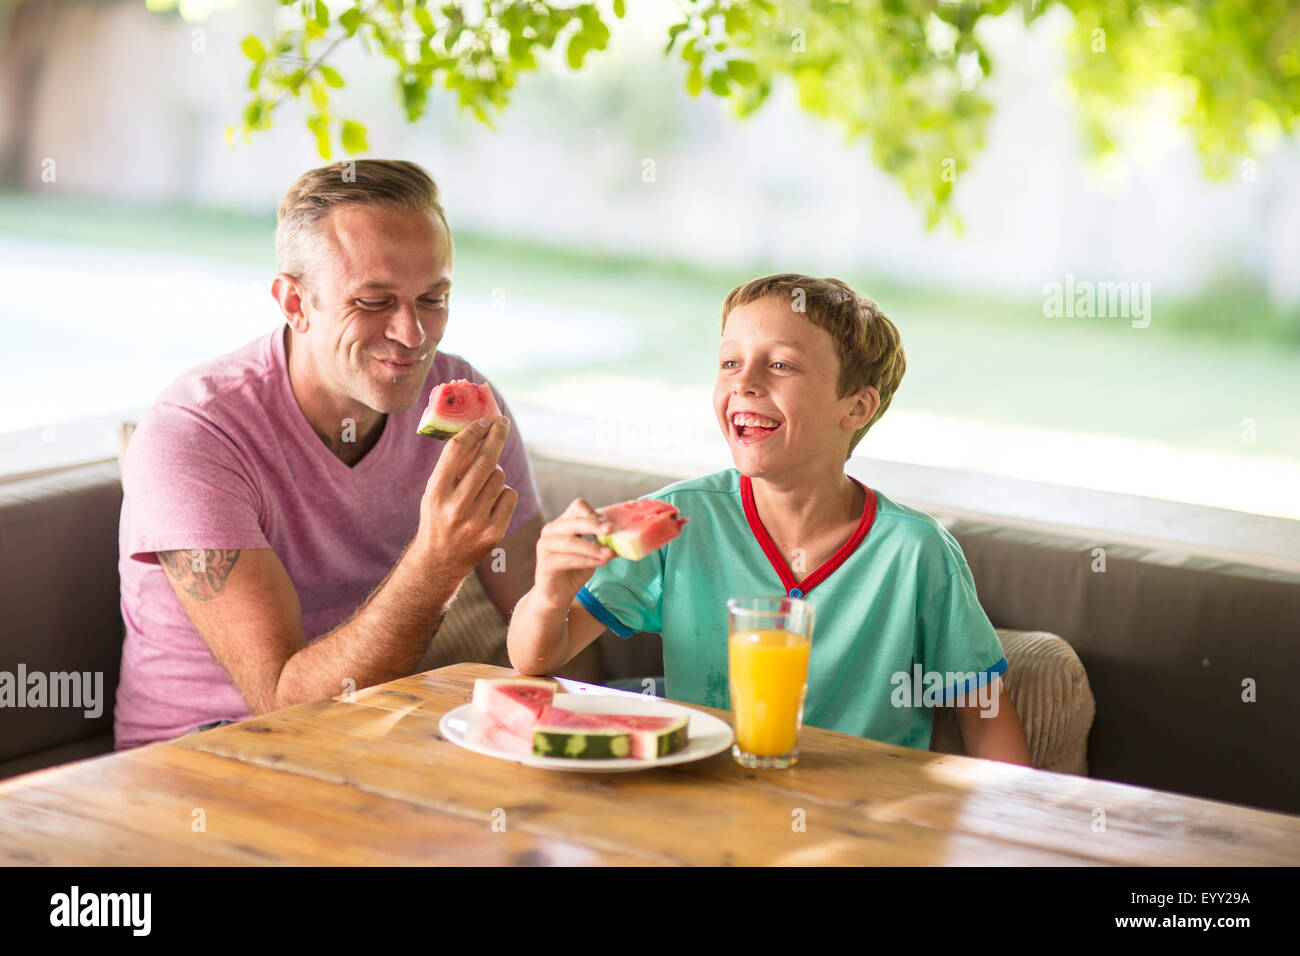 Caucasian father and son eating outdoors Banque D'Images